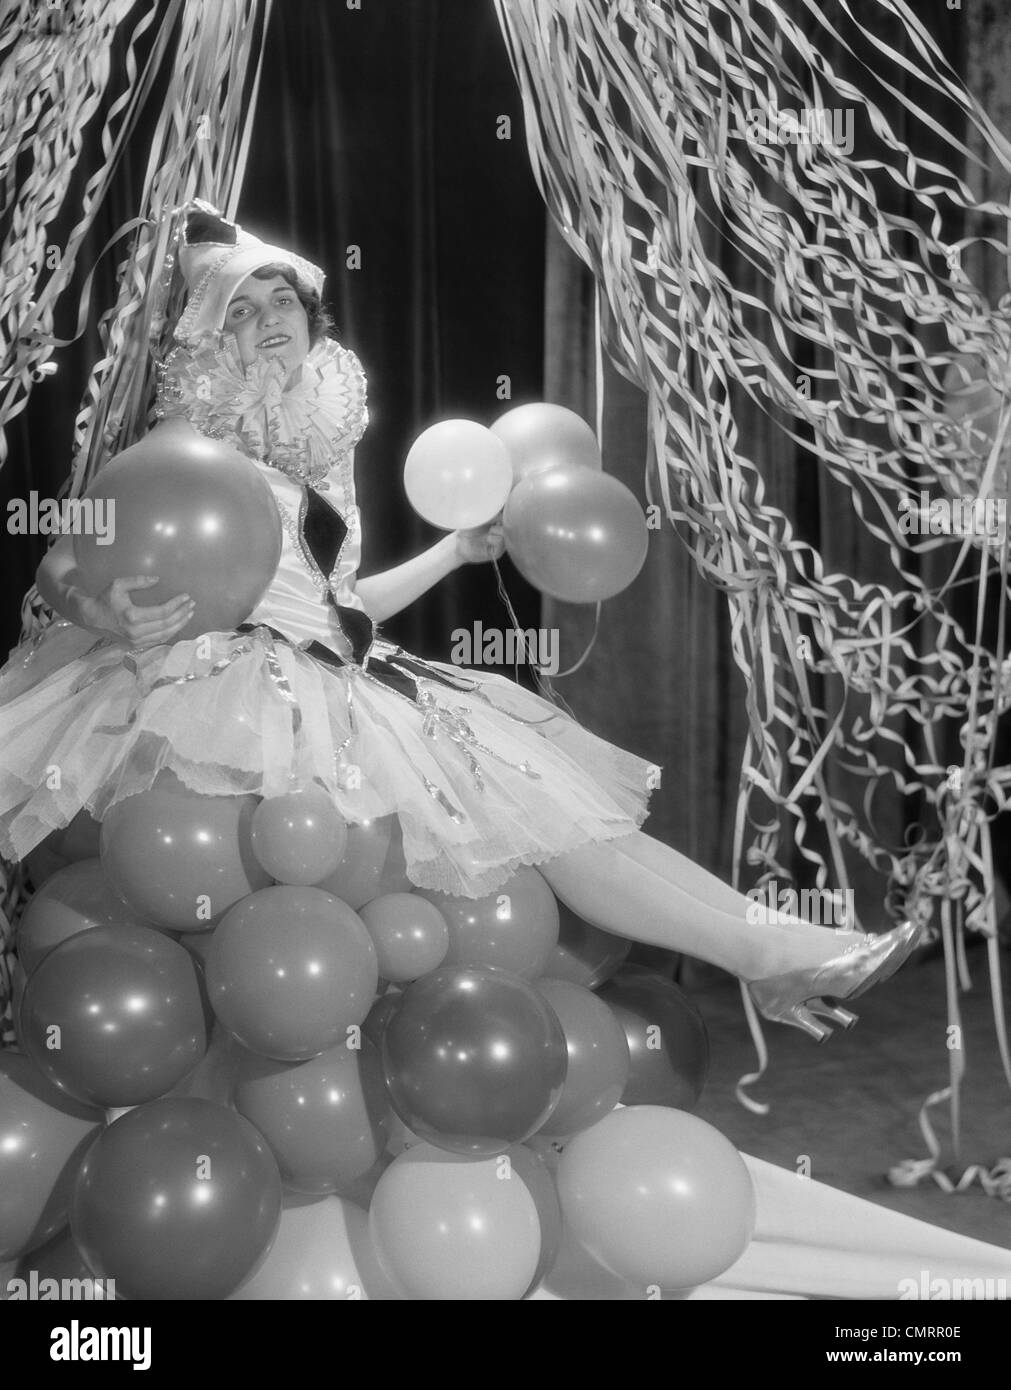 1920s WOMAN DRESSED IN HARLEQUIN COSTUME SITTING ON STACK OF BALLOONS Stock Photo